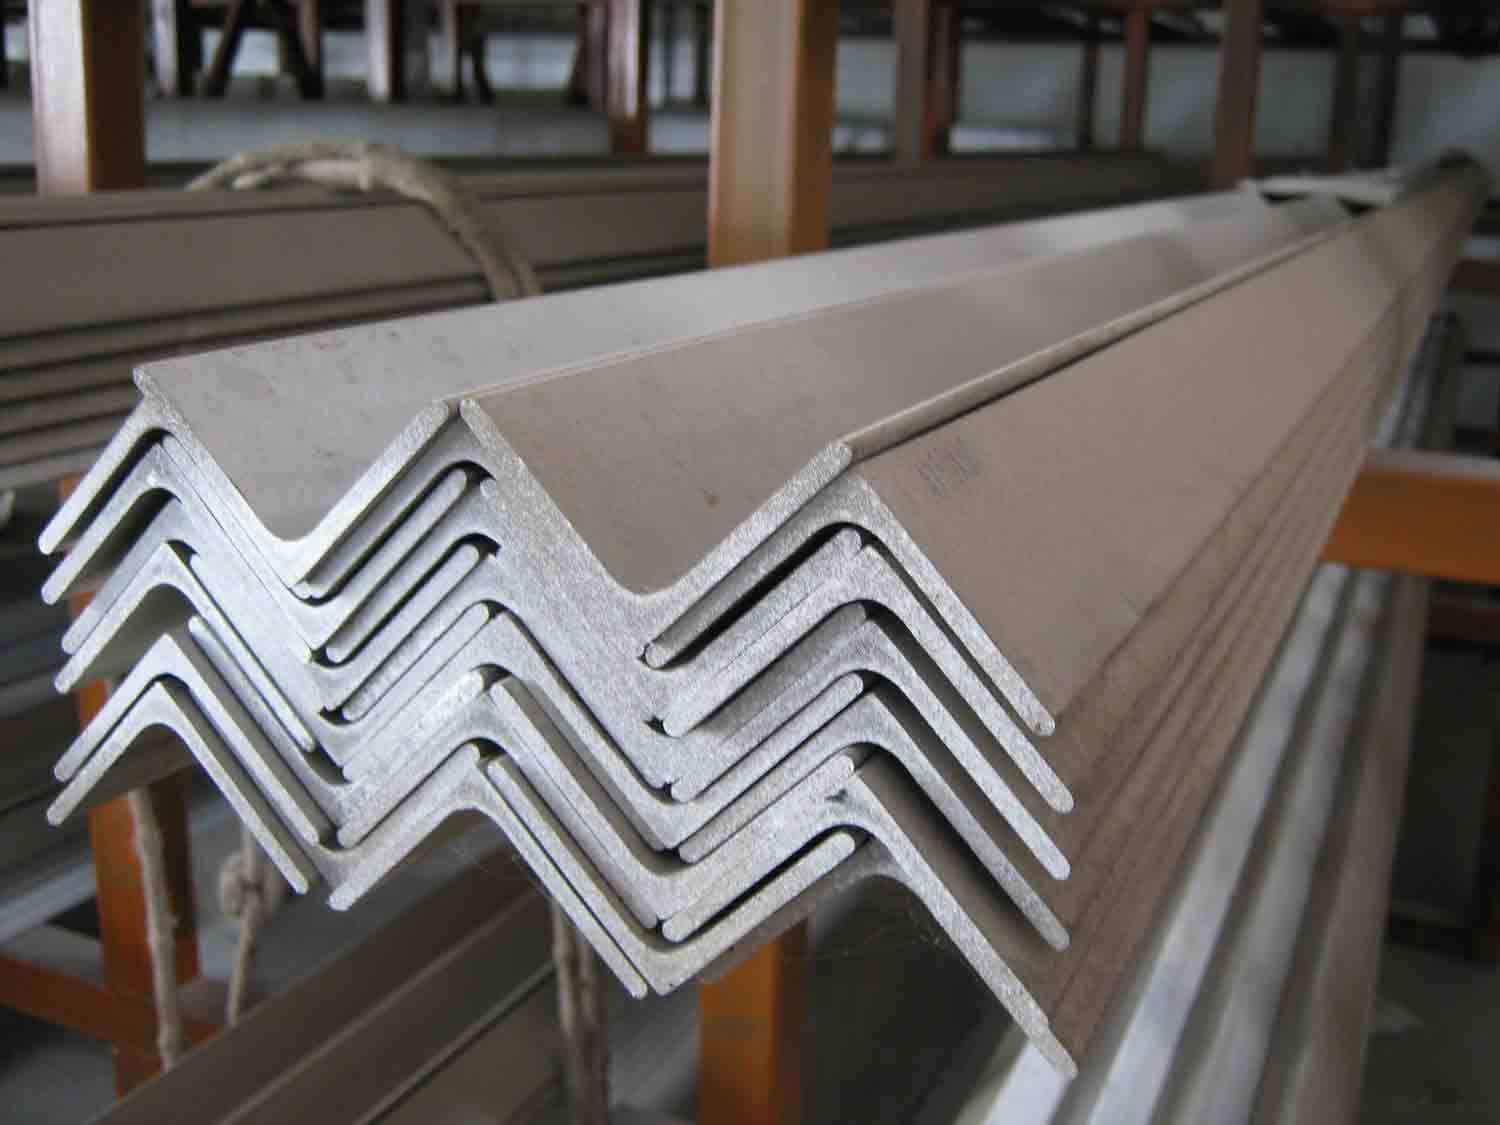 Hot Rolled 200x200 Profiles L Shape Galvanized Mild Steel 50x50x6 Low Price Equal Steel Angle